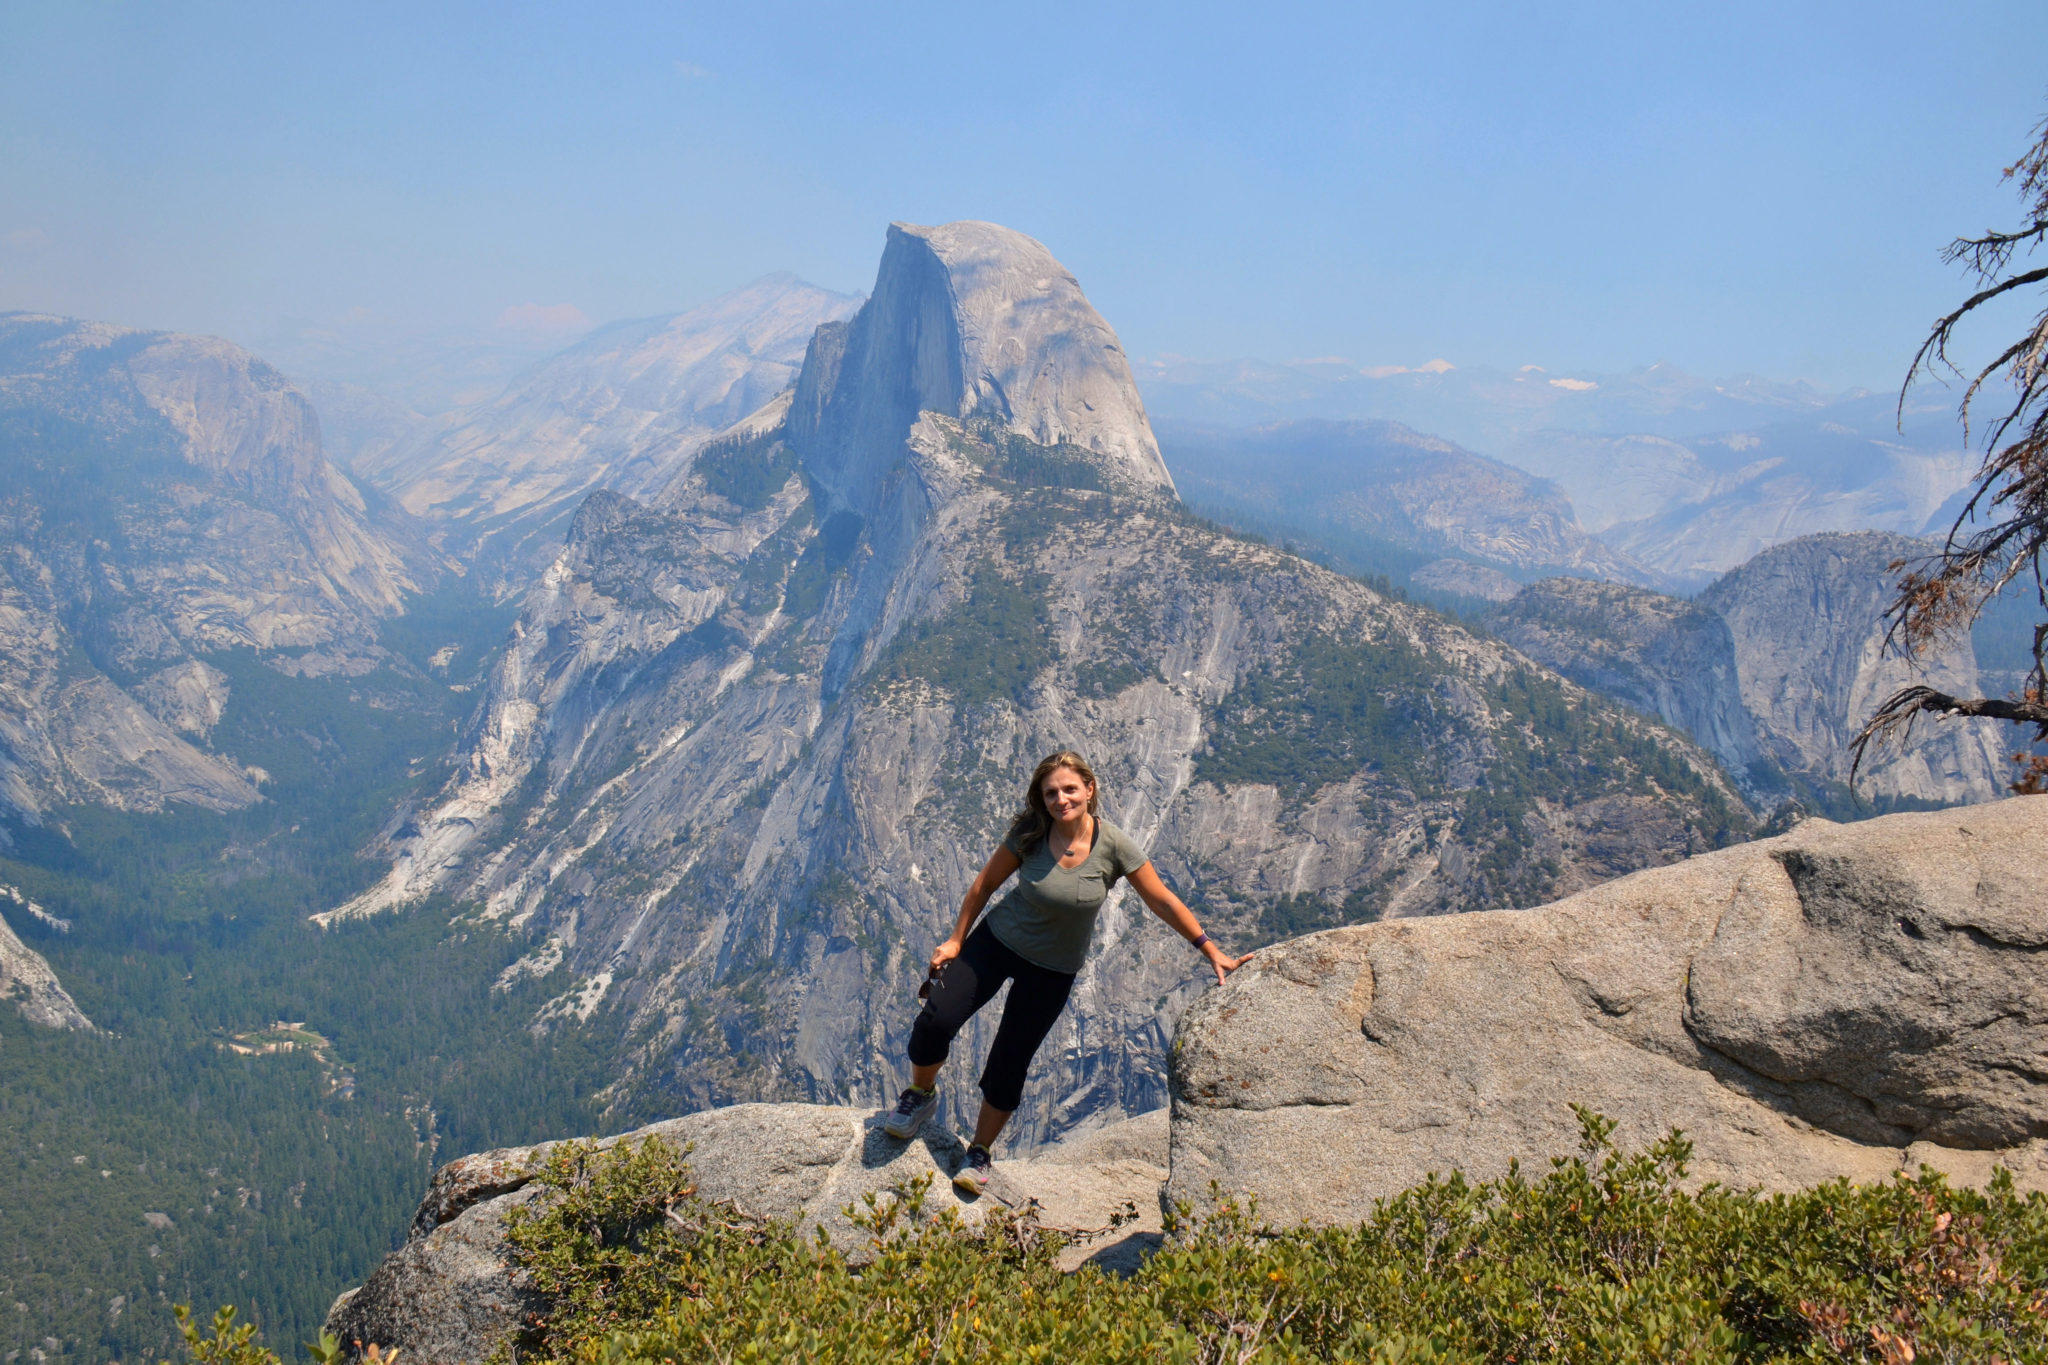 At Glacier Point with Half Dome and Yosemite Valley in the back